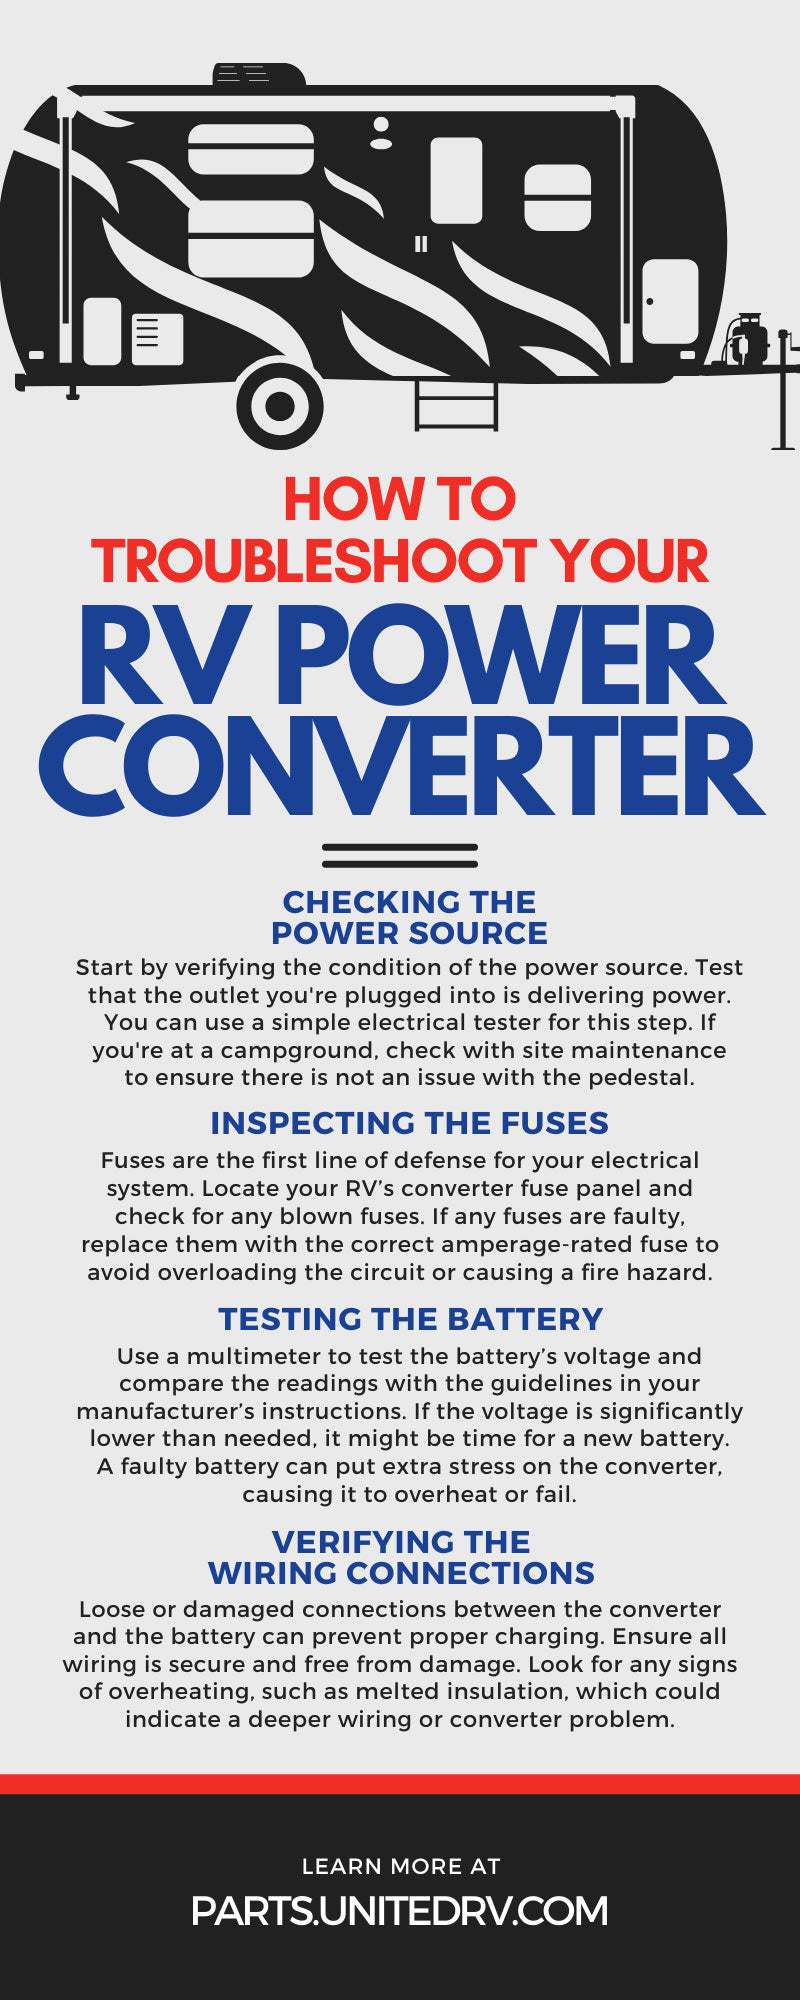 How To Troubleshoot Your RV Power Converter